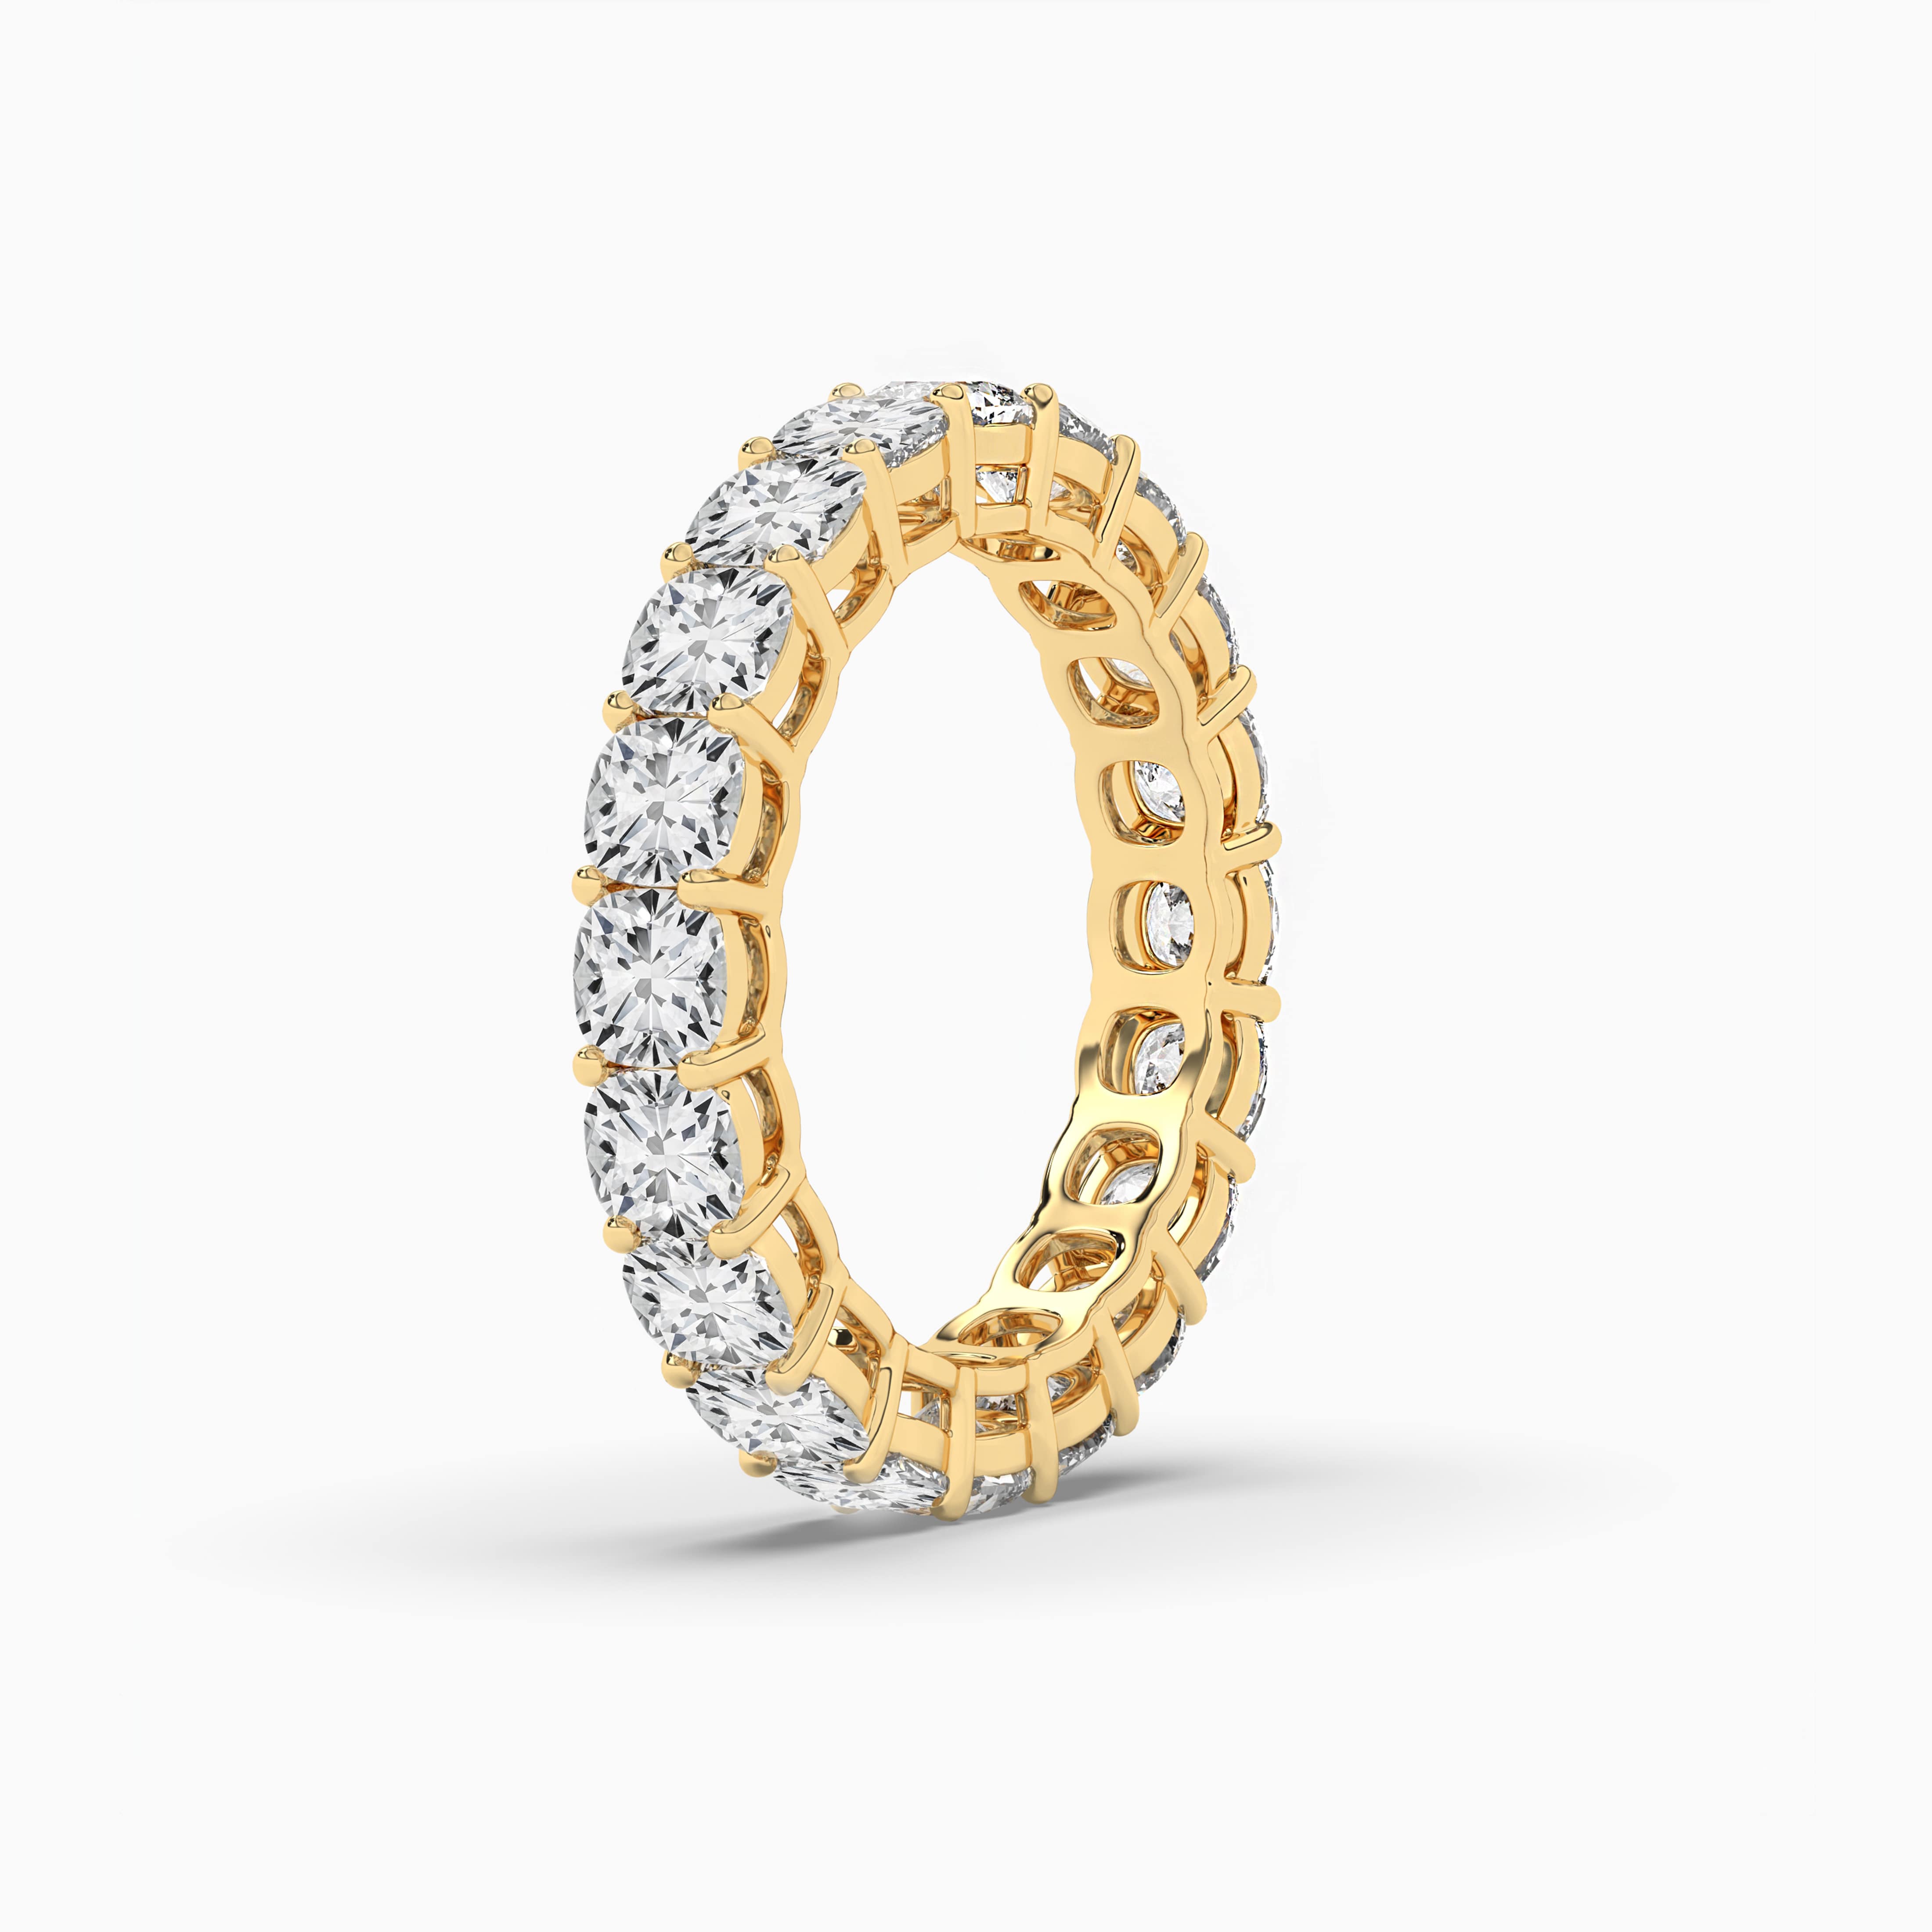 Cushion Diamond Eternity Bands with White Diamond in Yellow Gold